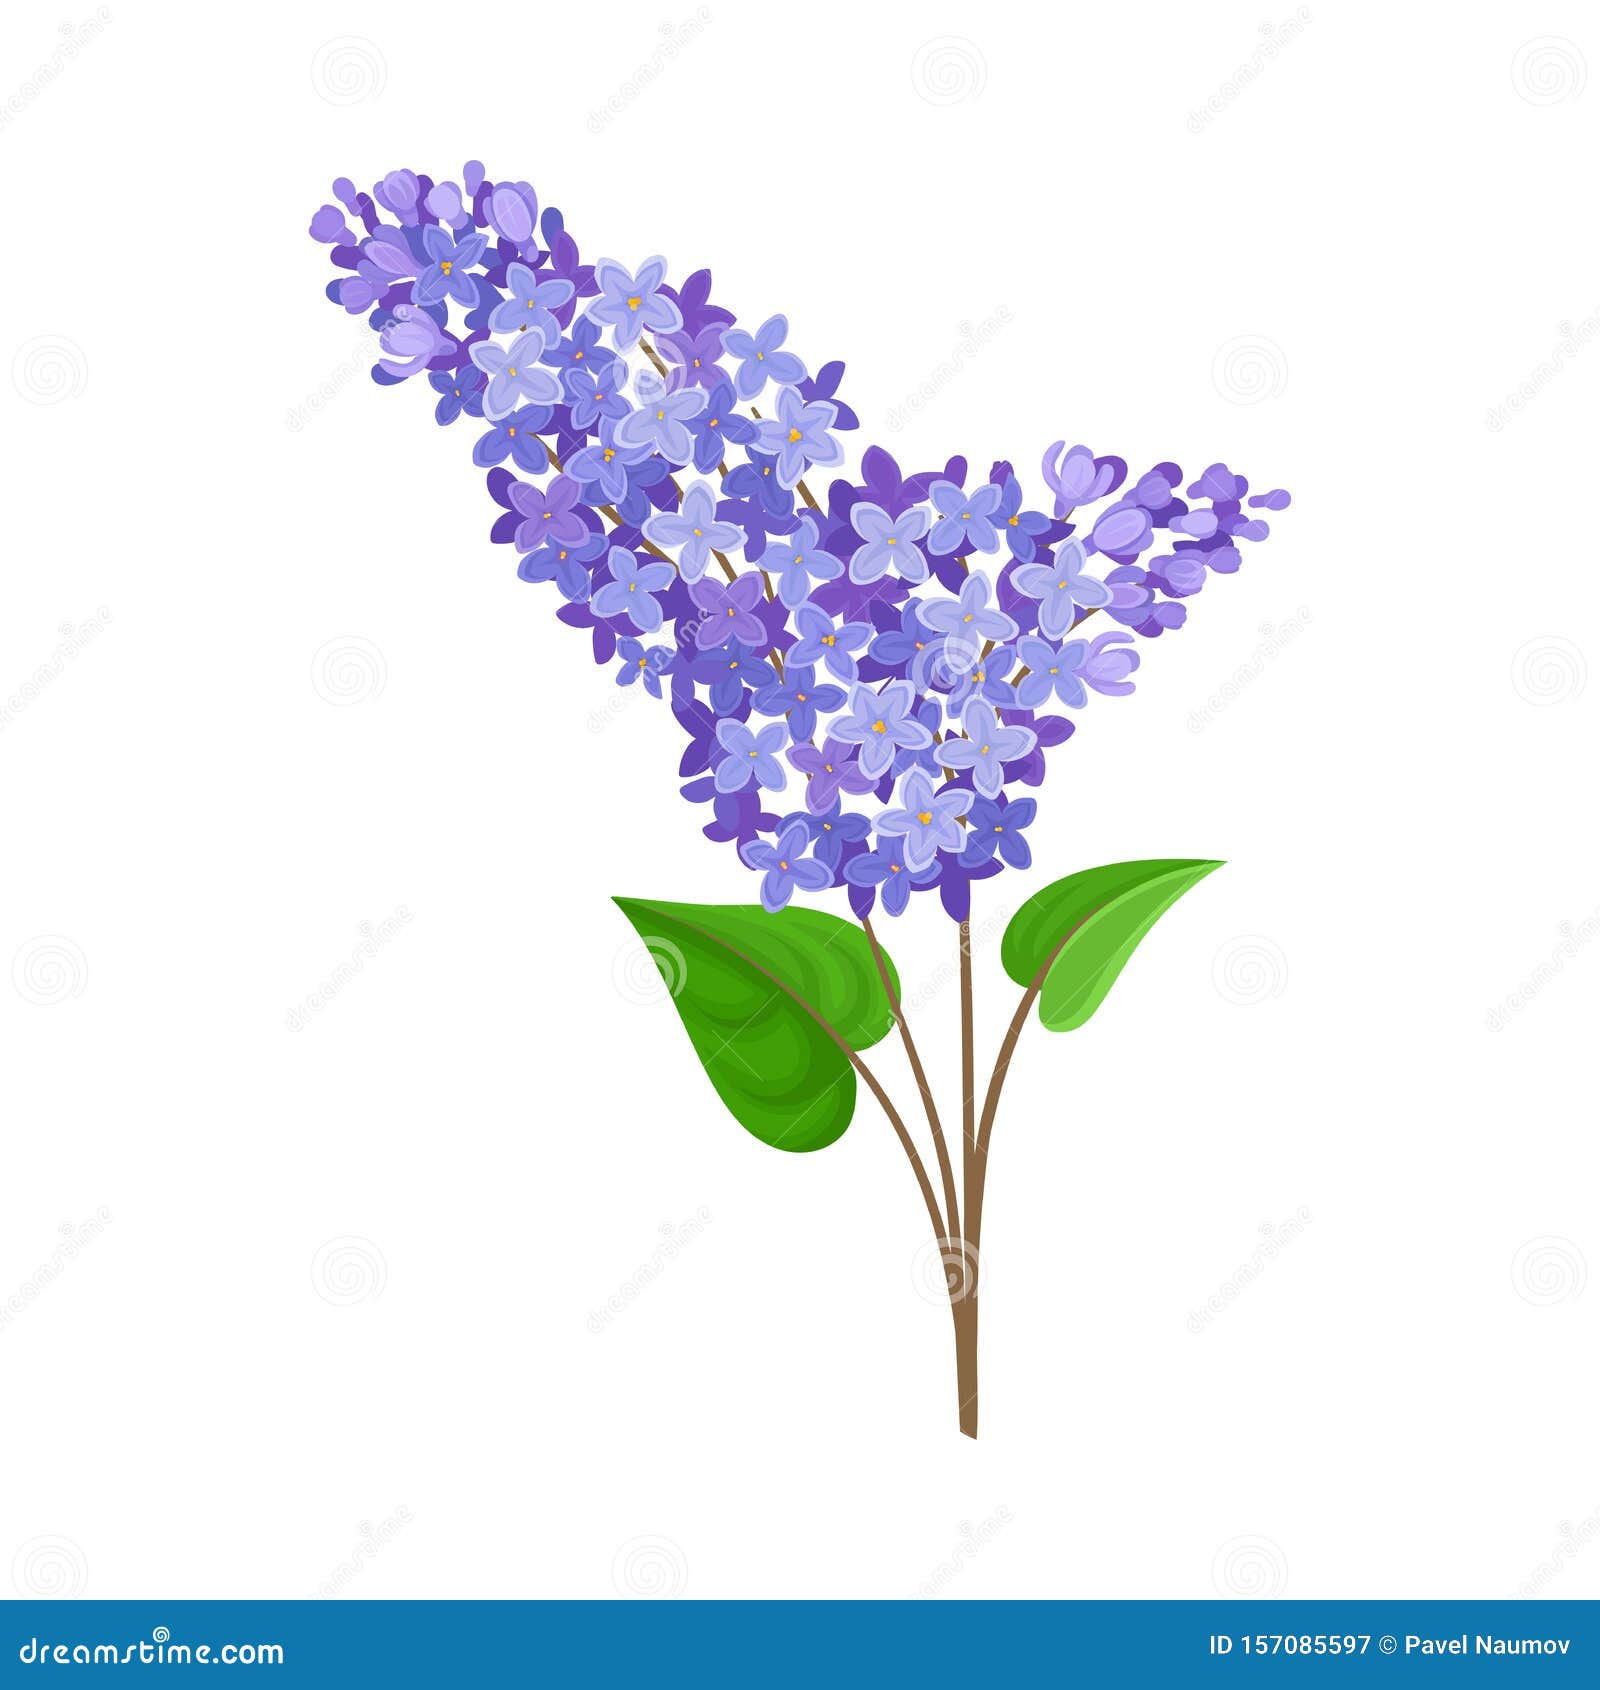 Lush Branch of the Blue Lilac. Vector Illustration on a White ...